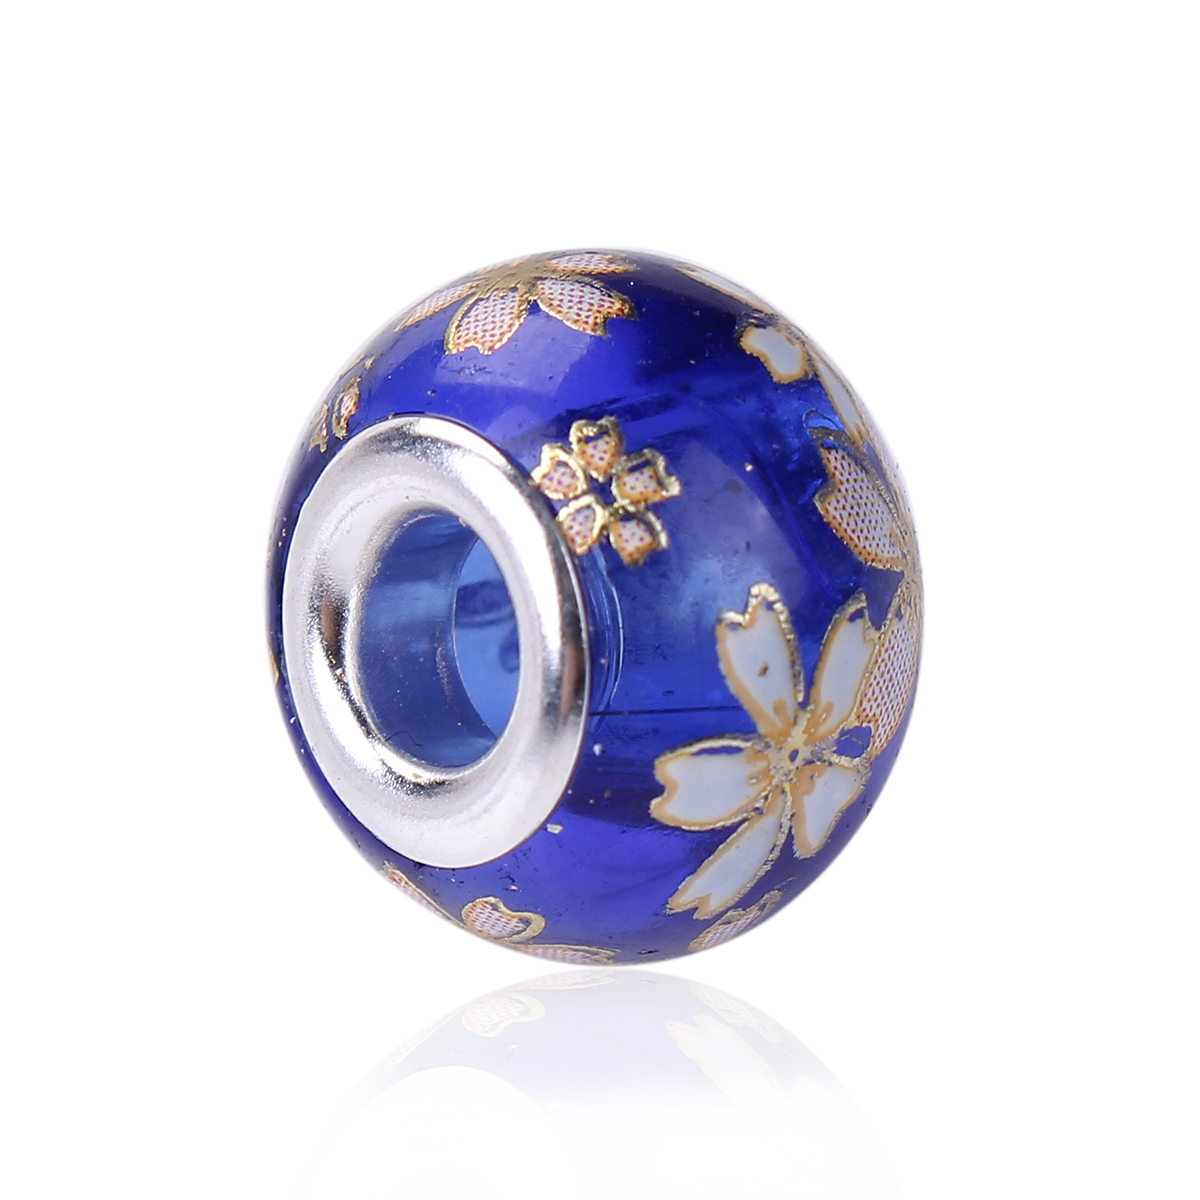 Picture of Glass Japan Painting Vintage Japanese Tensha European Style Large Hole Charm Beads Round Silver Plated Sakura Flower Royal Blue Transparent About 14mm( 4/8") Dia, Hole: Approx 4.7mm, 5 PCs